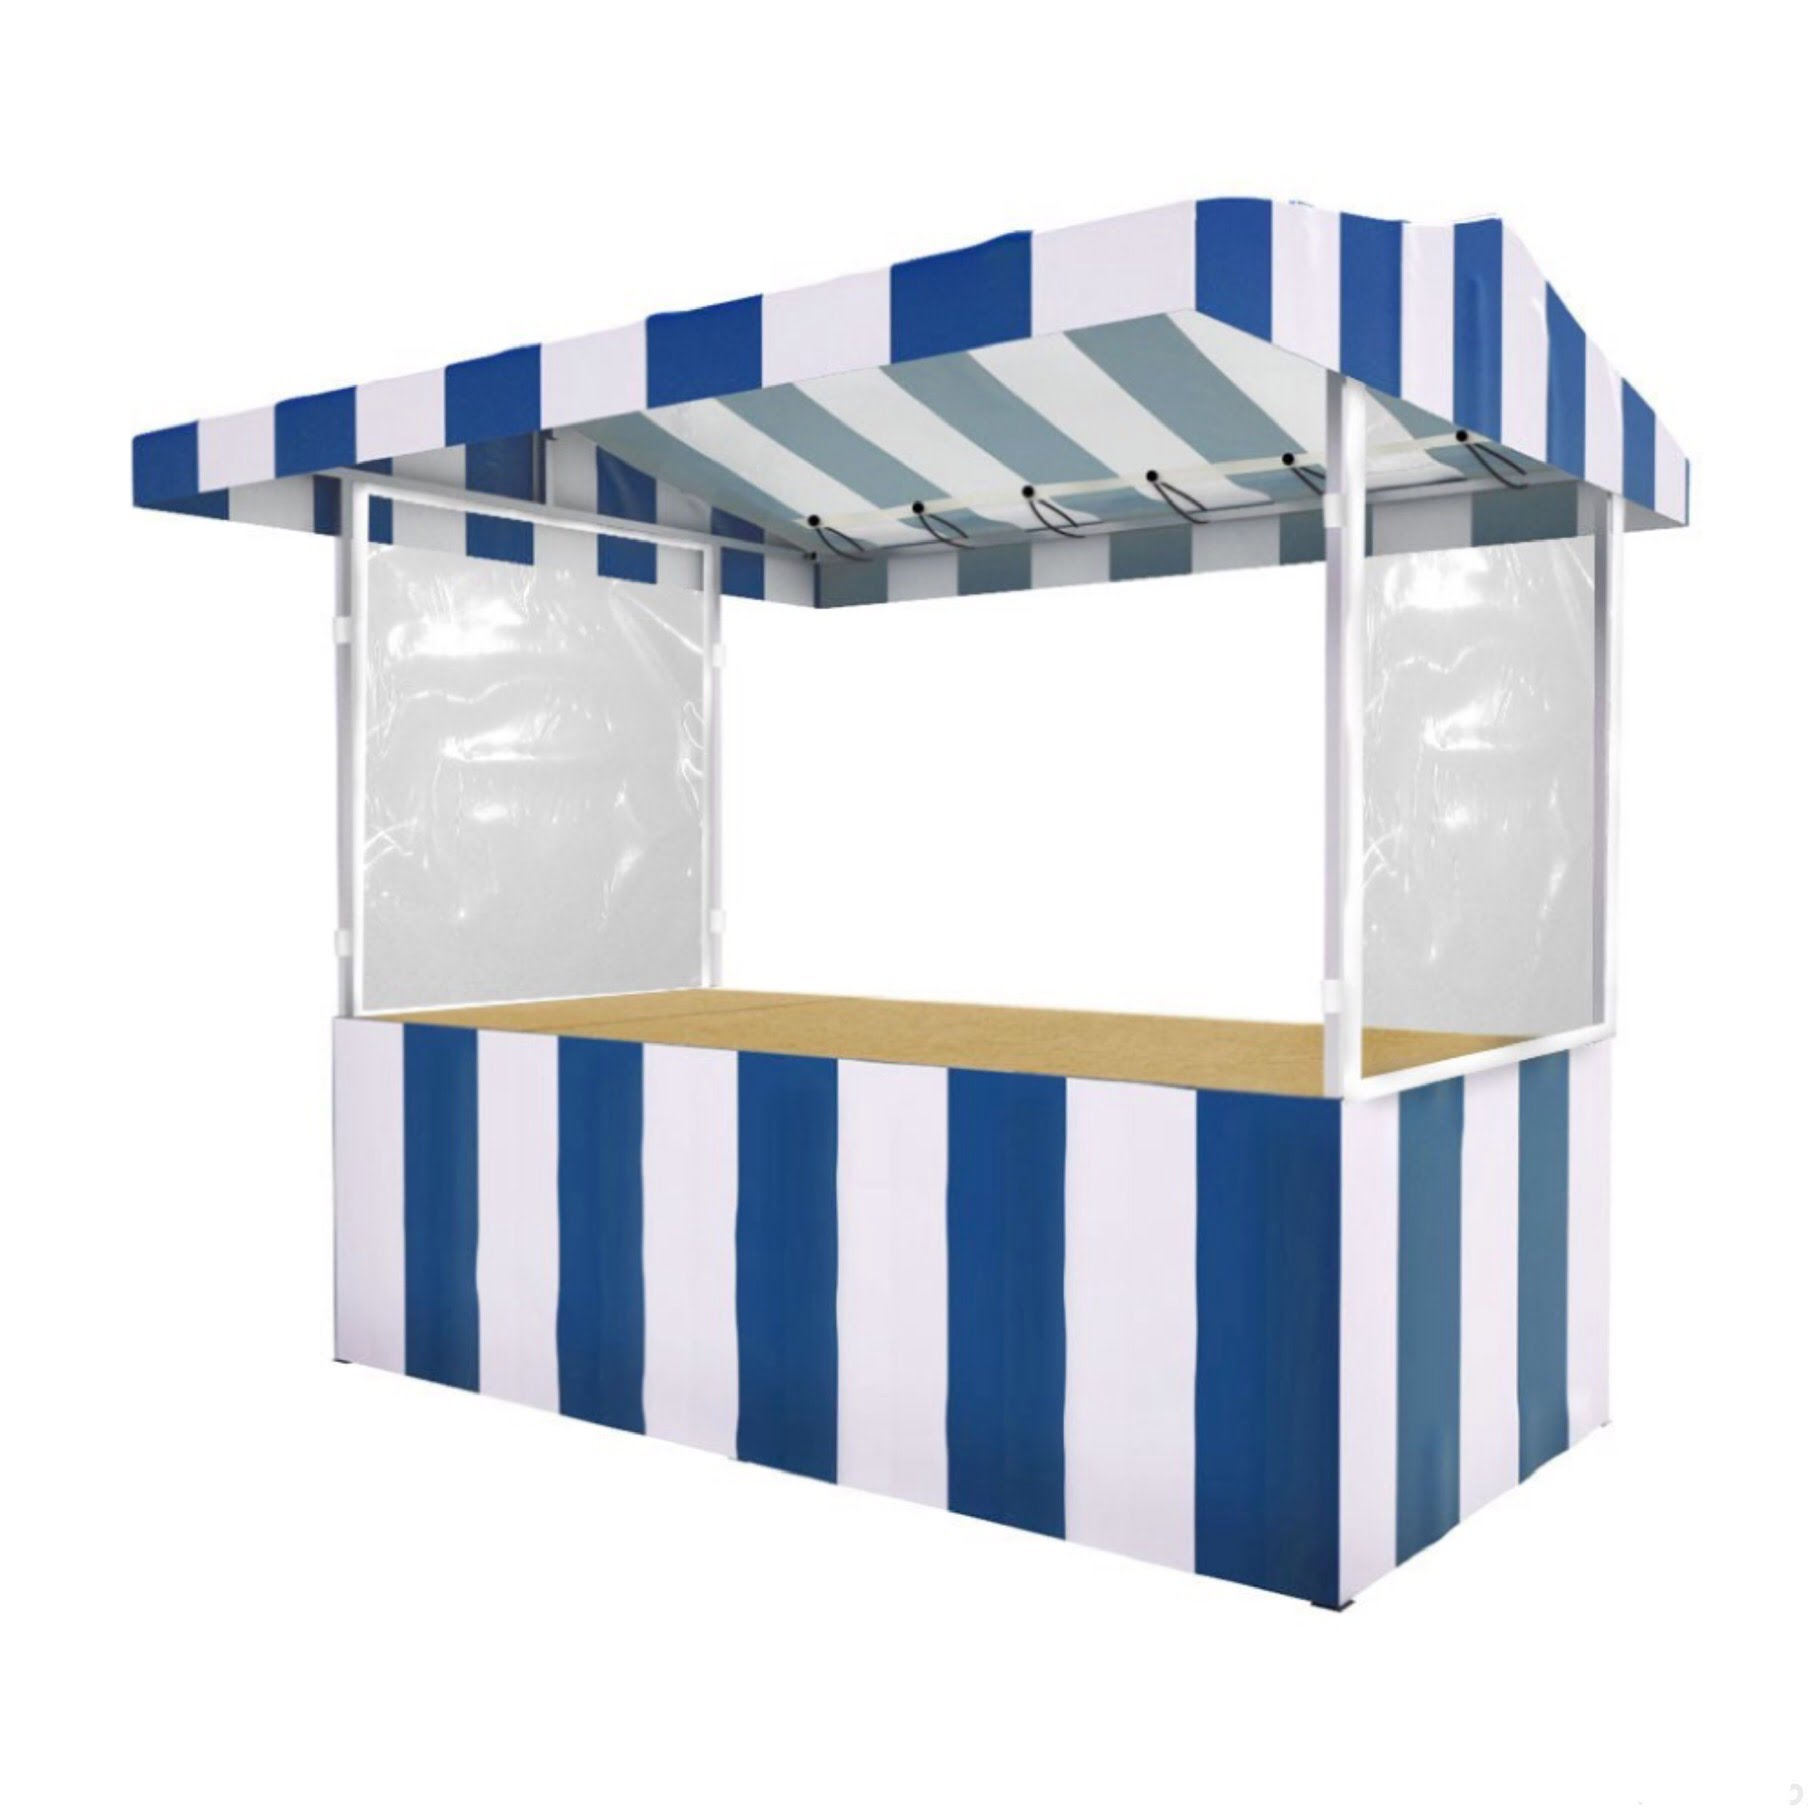 Blue and white striped market stall